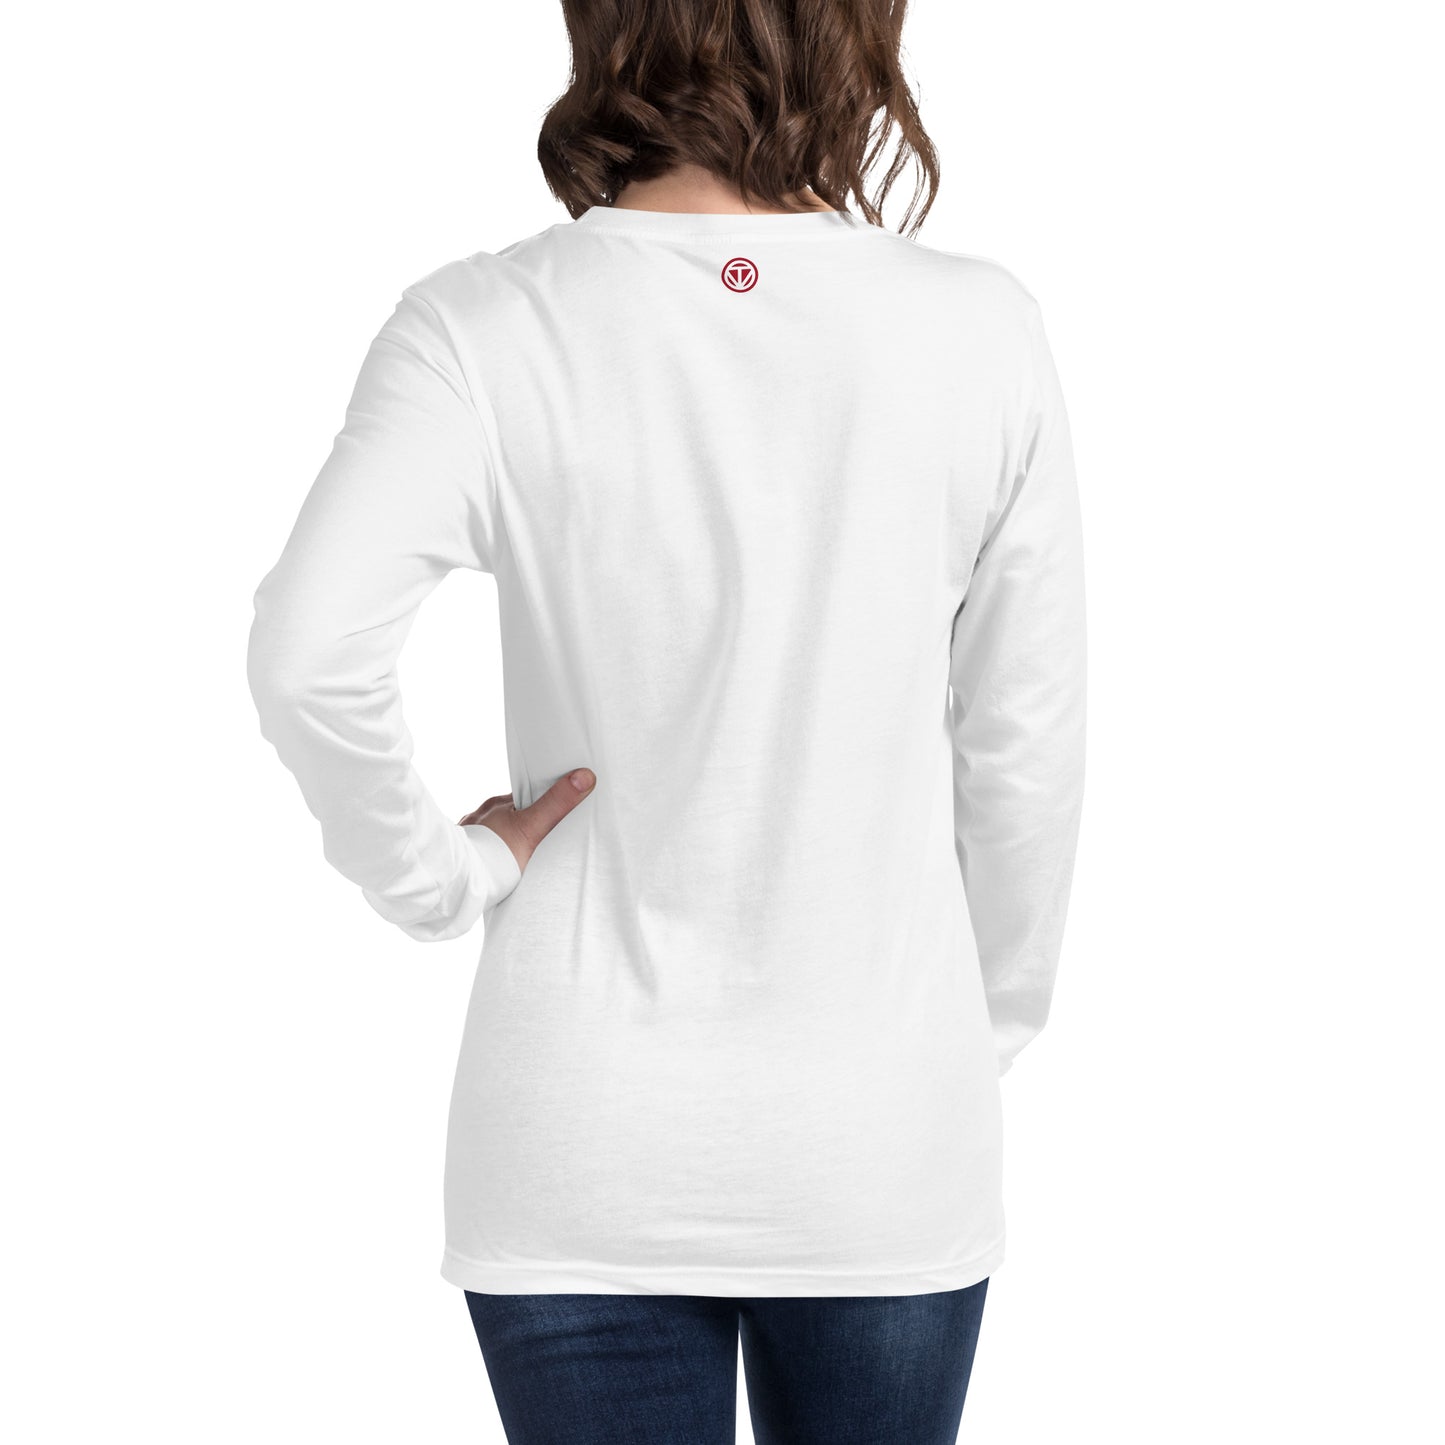 TIME OF VIBES - Long Sleeve Tee LOVE (White) - €39.00